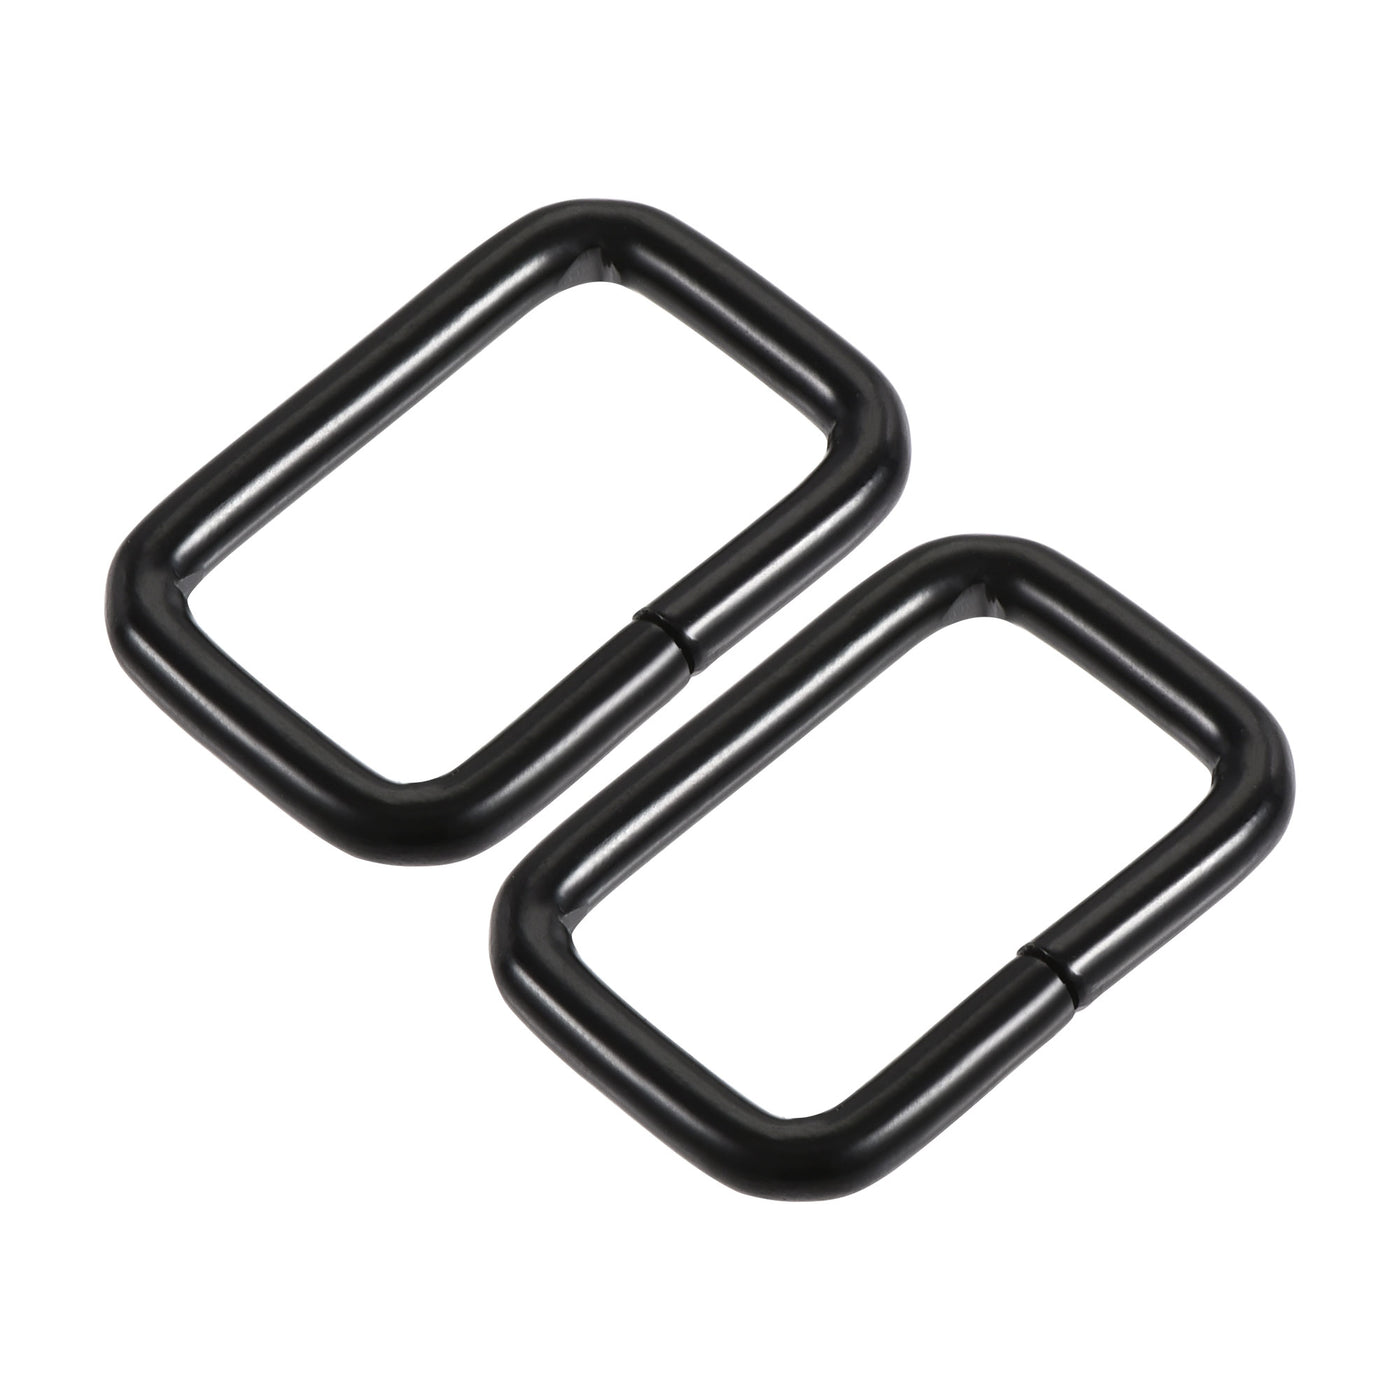 uxcell Uxcell Metal Rectangle Ring Buckles 25x16mm for Bags Belts DIY Light Black 20pcs